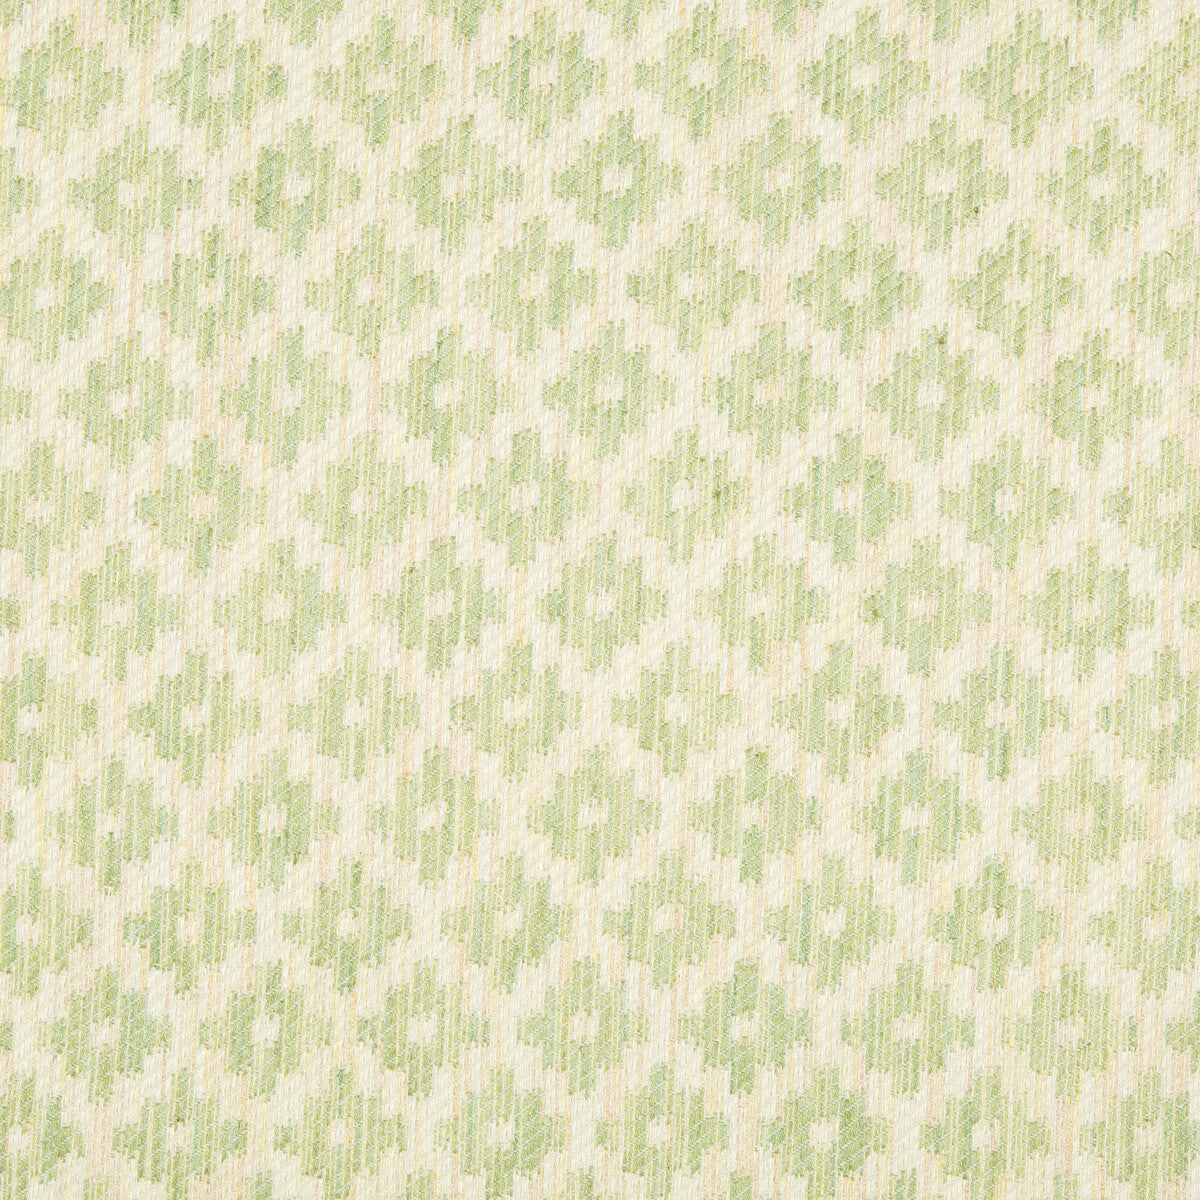 Baronet Strie fabric in celery color - pattern 8017142.3.0 - by Brunschwig &amp; Fils in the Baronet collection